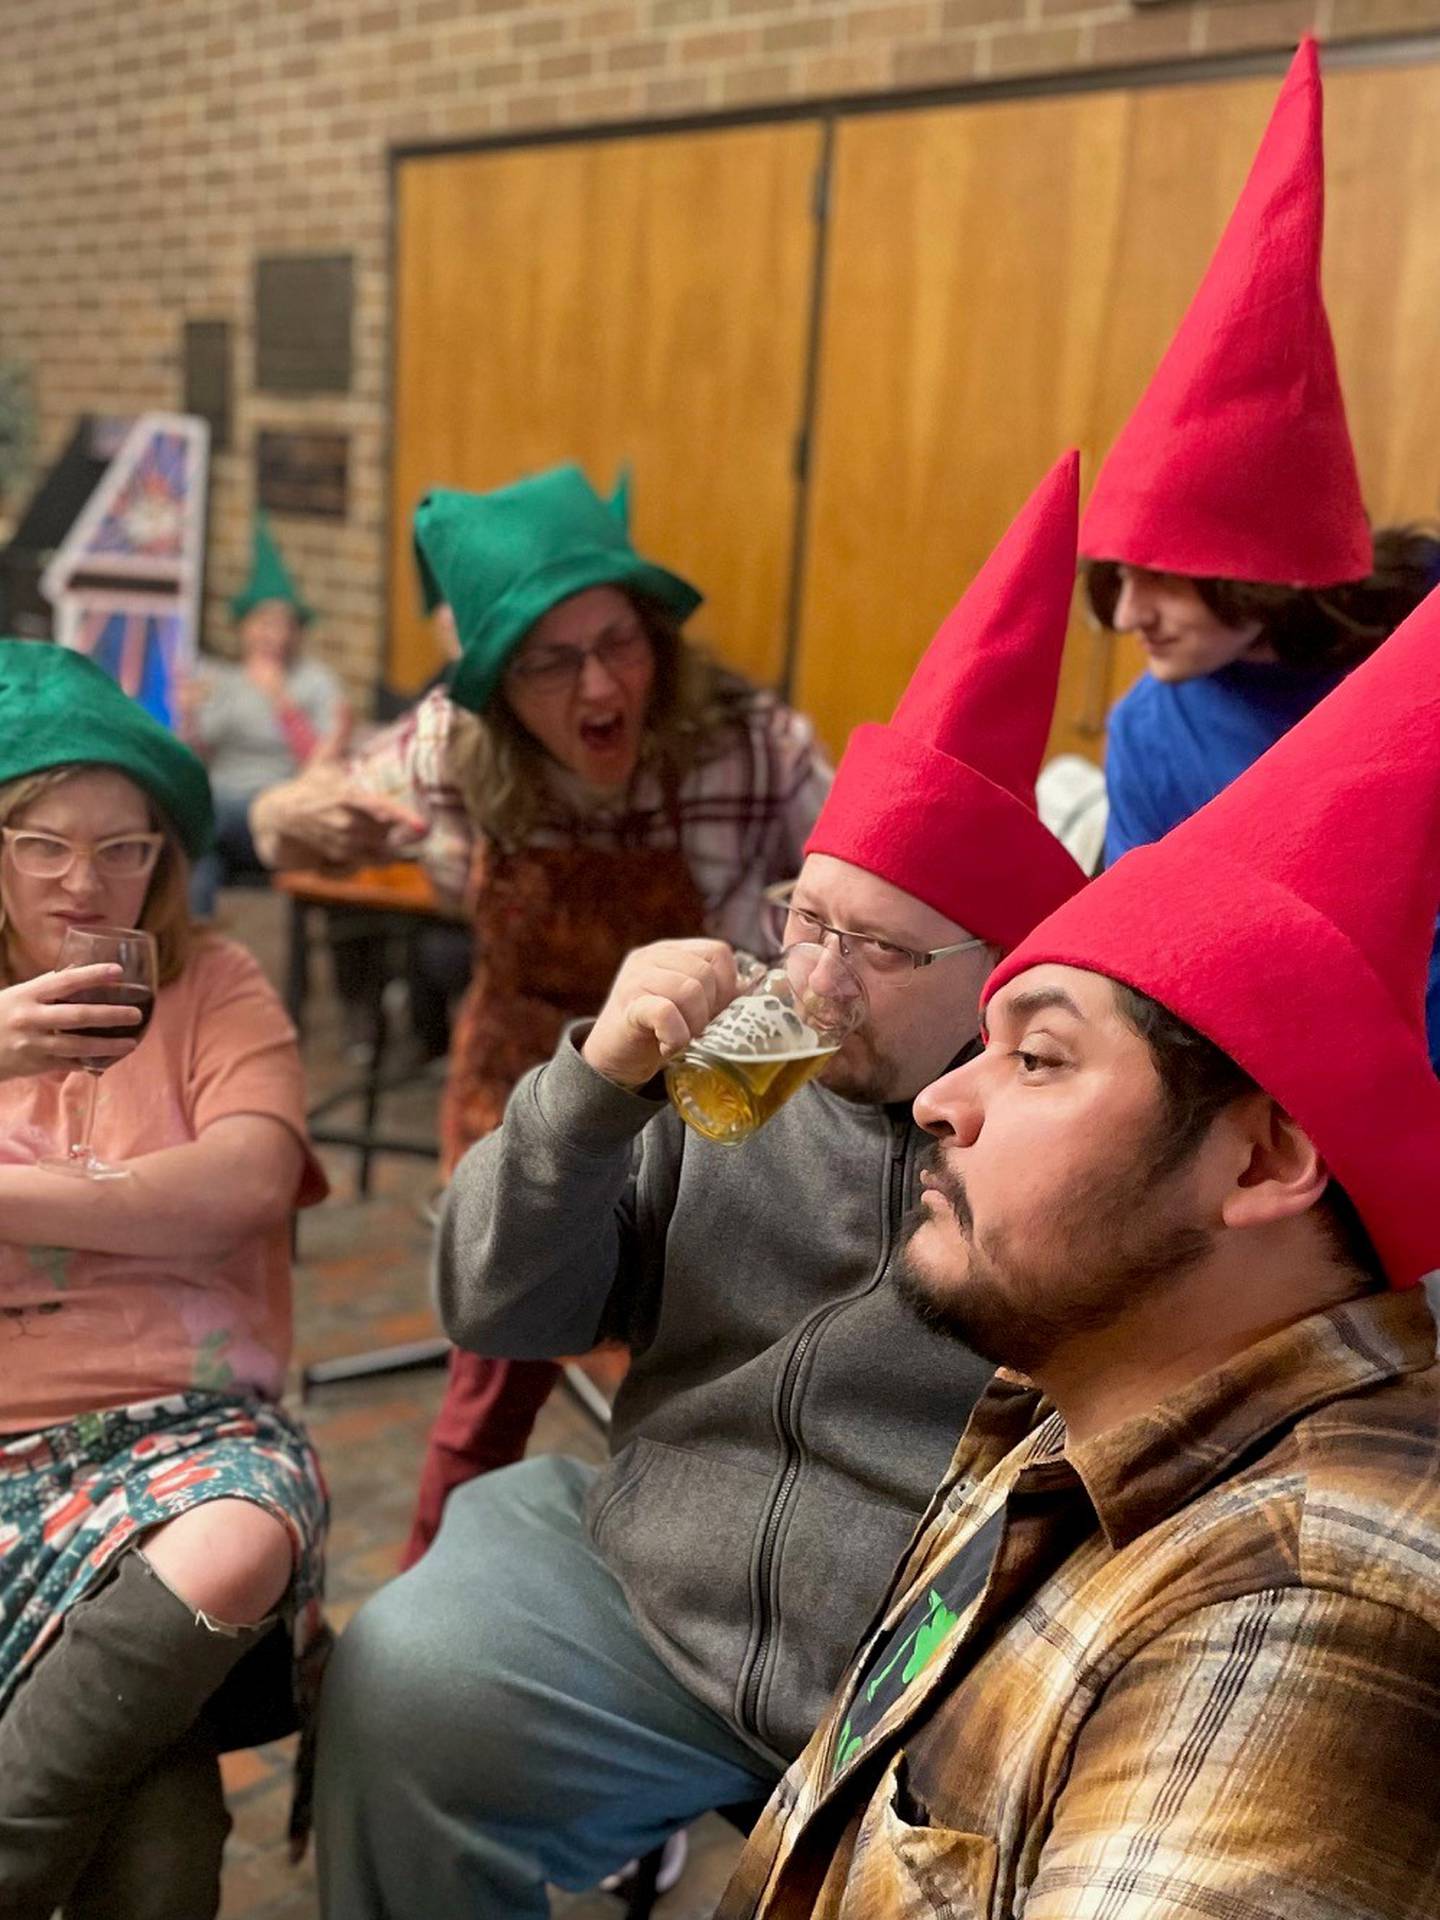 “The Drunk’n Gnome” R-rated live show for ages 18 and up returns to the Billie Limacher Bicentennial Park and Theatre for its 2022 show on Dec. 9 and Dec. 10. Tickets are just $5 each.